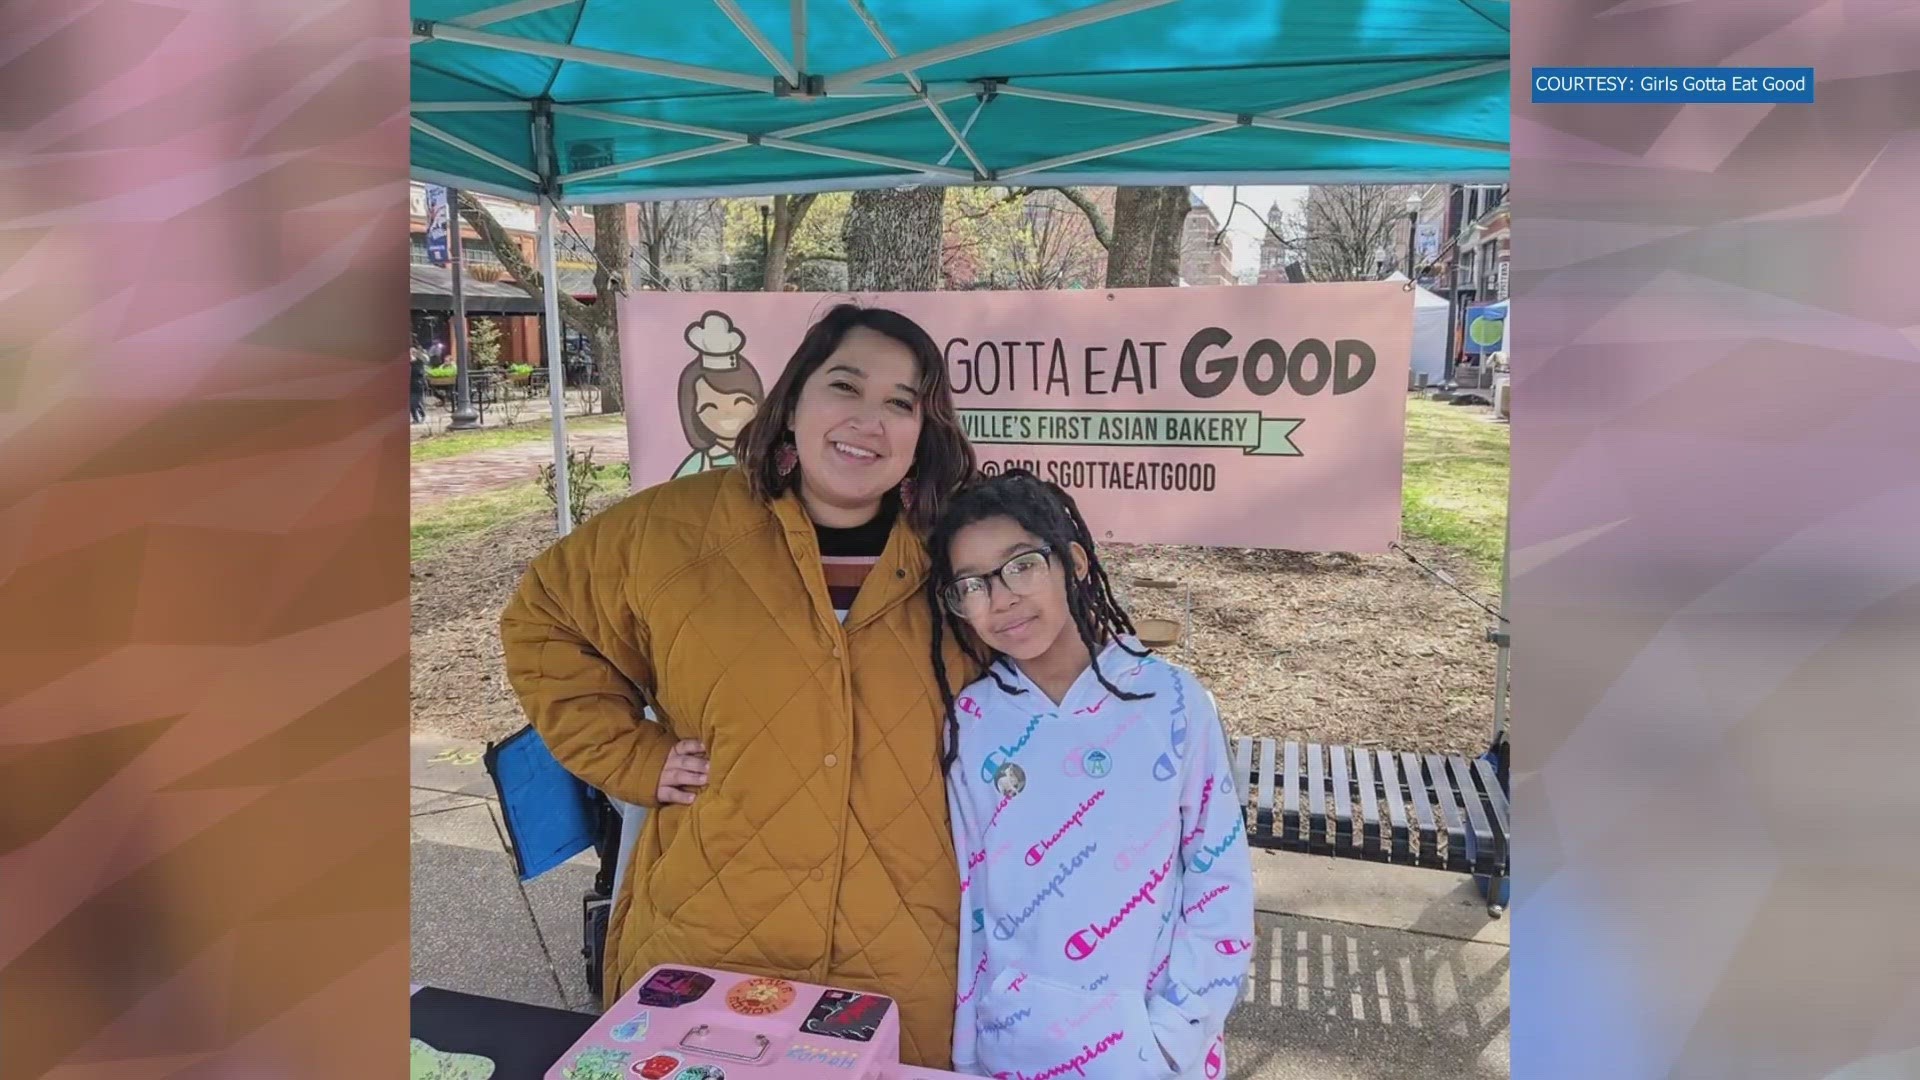 In 2020, Jessica Carr opened Girls Gotta Eat Good, an Asian bakery that combines her Filipino and Southern roots.